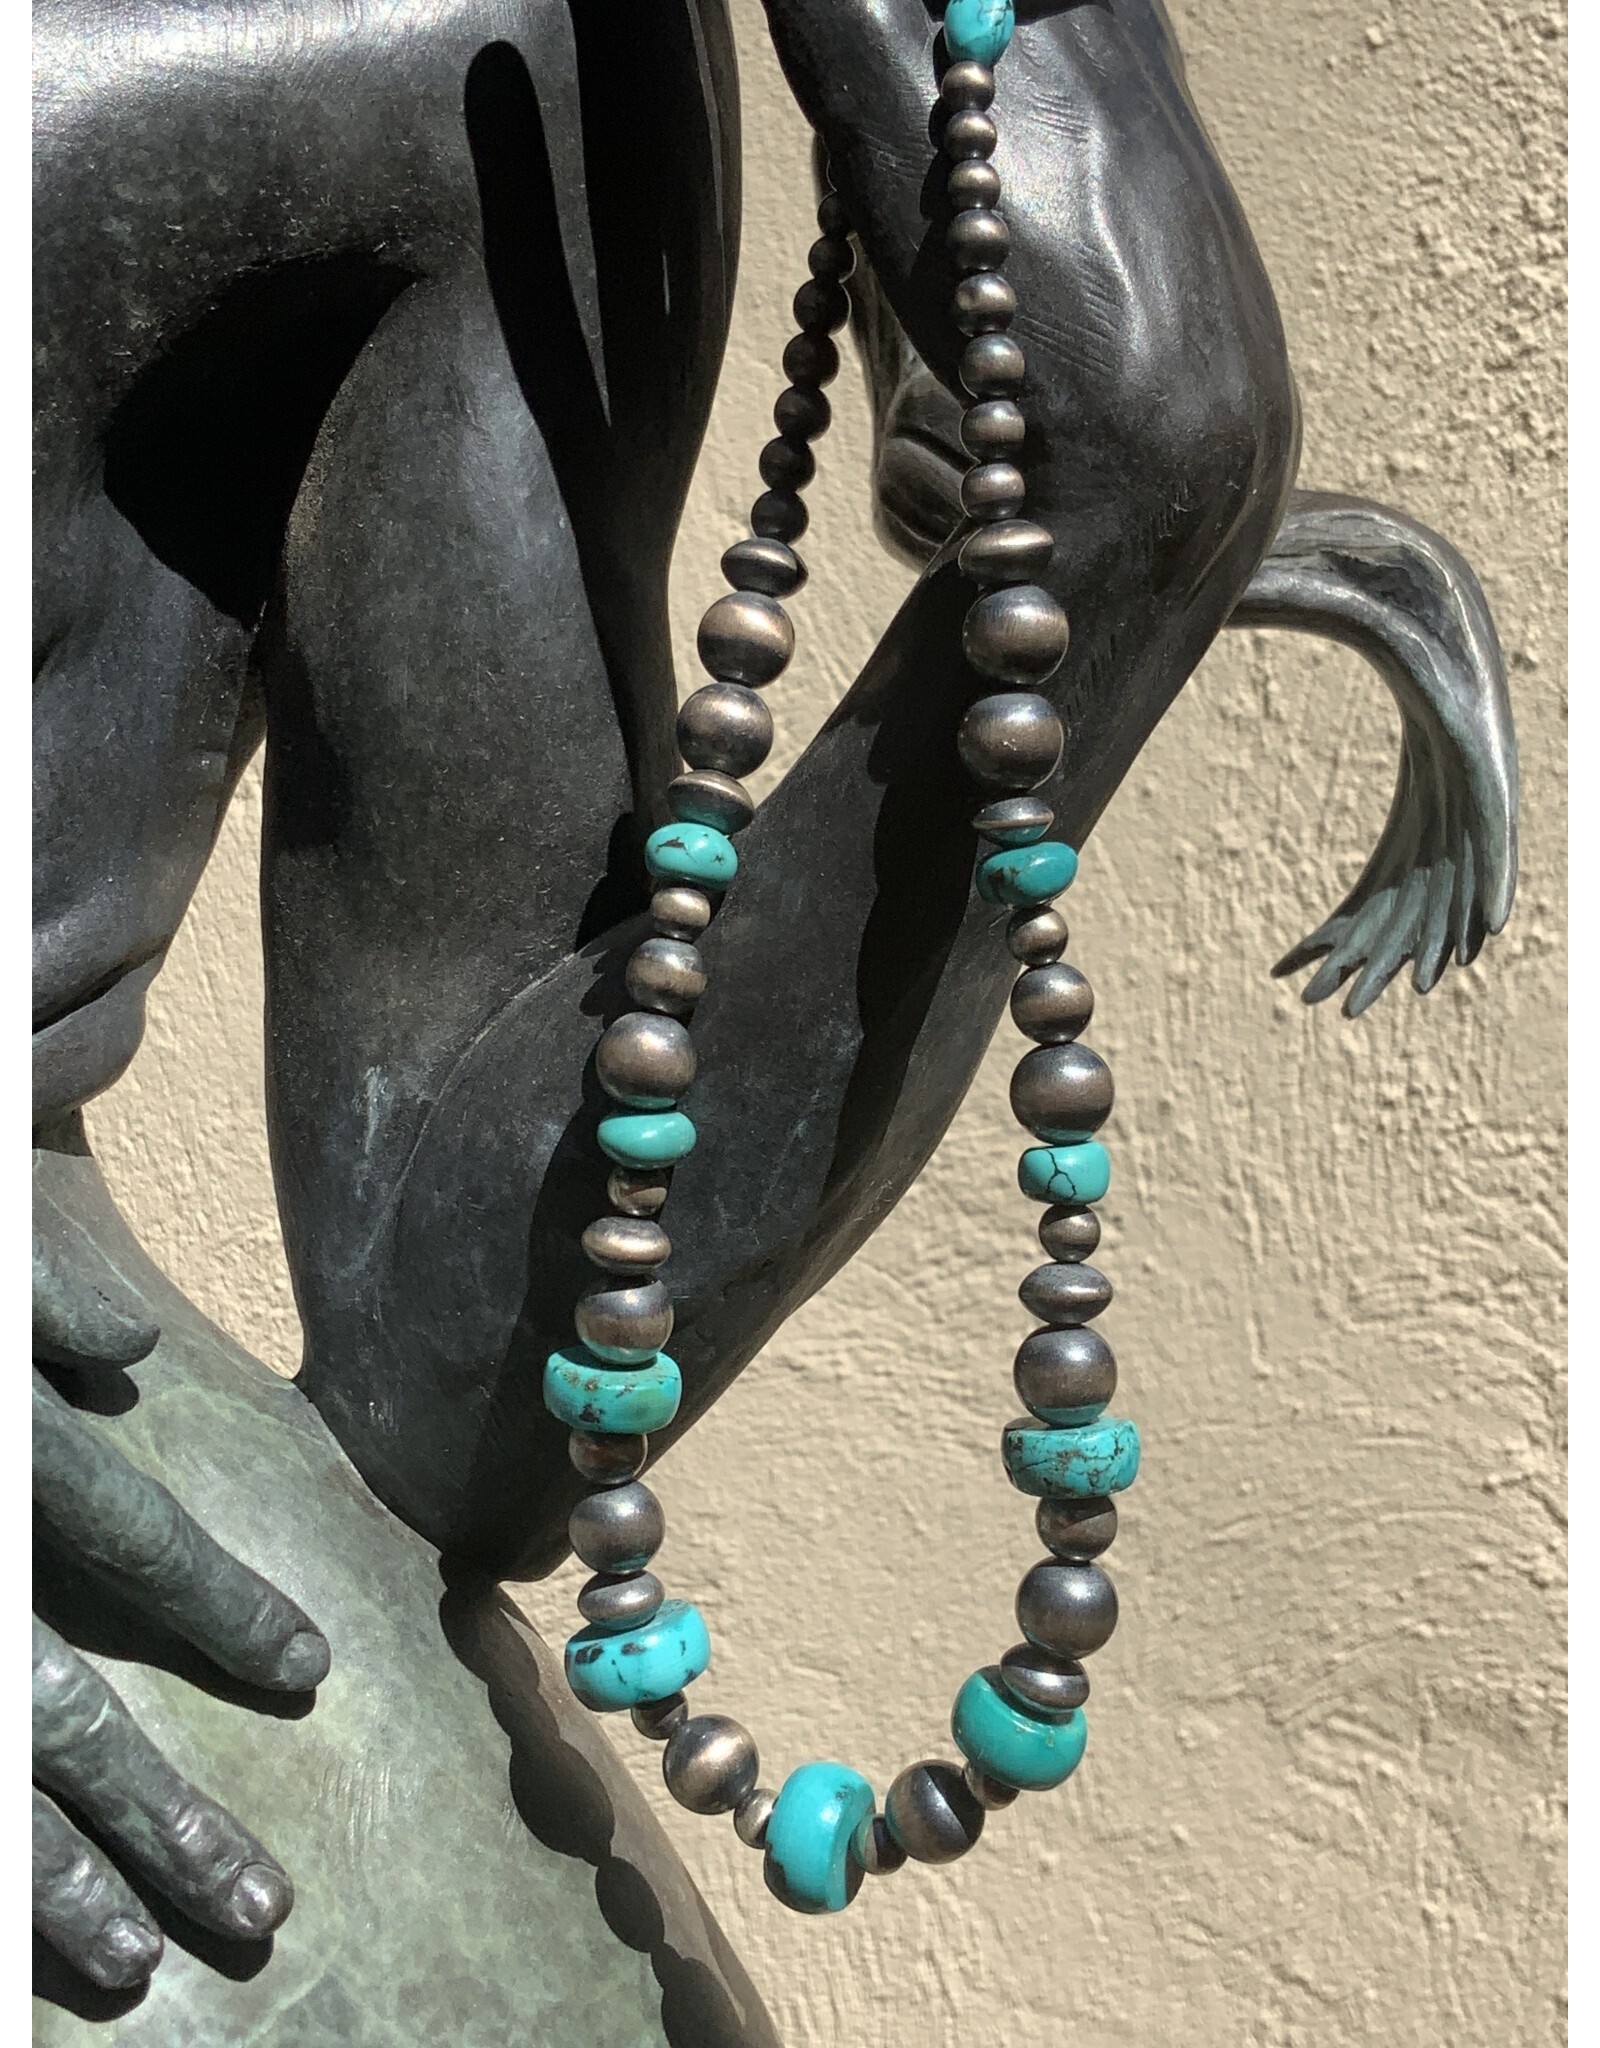 Annette Colby - Jeweler 18” SS Oxidized Beads w Turquoise Necklace - AC